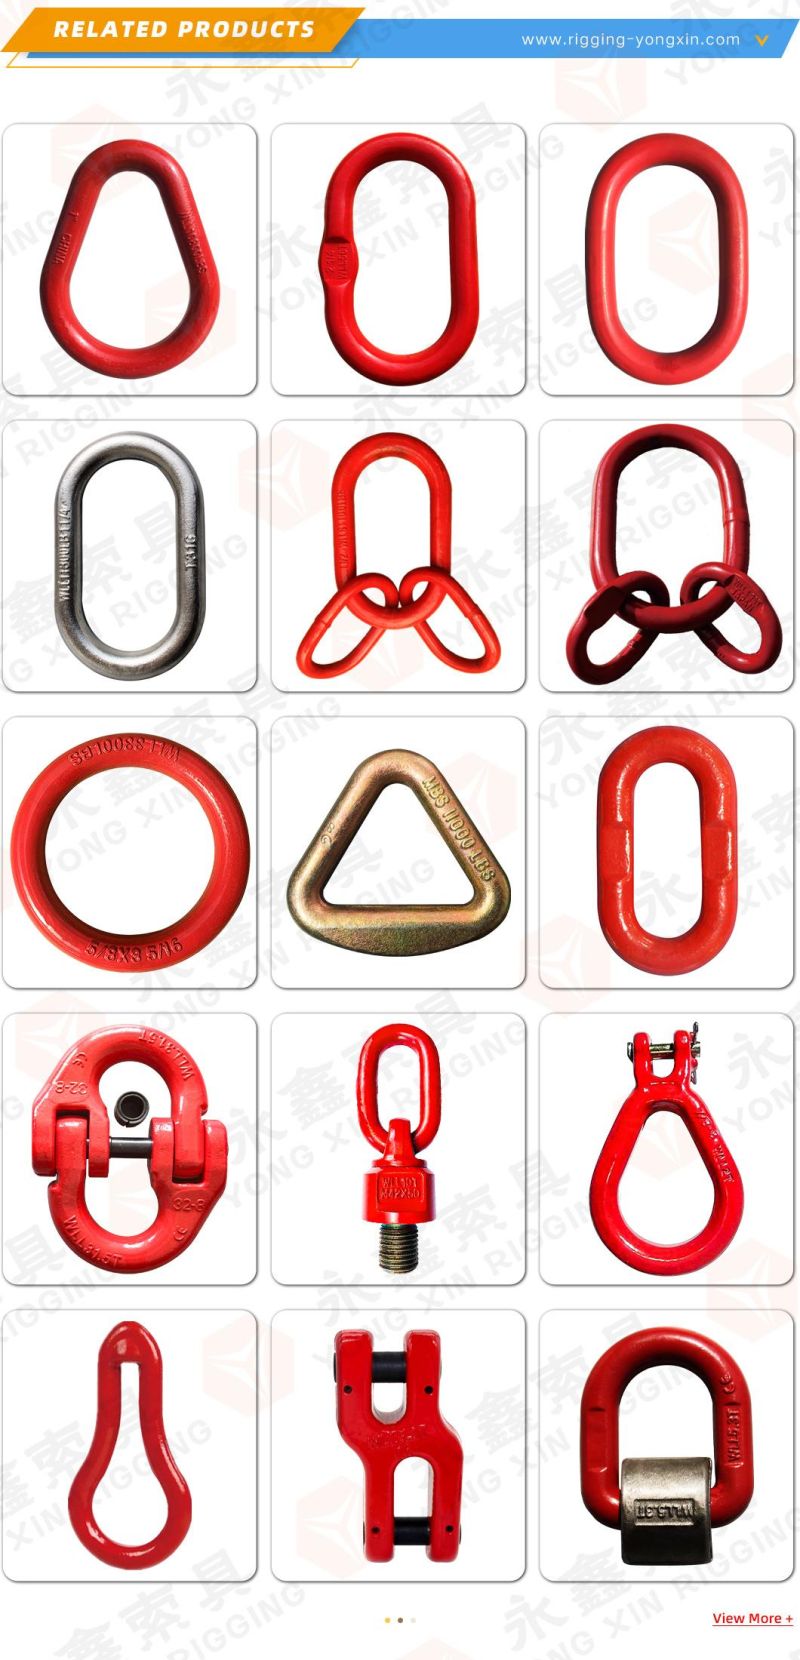 Rigging Hardware Forged Alloy Steel Pear Shaped Weldless Alloy Master Link